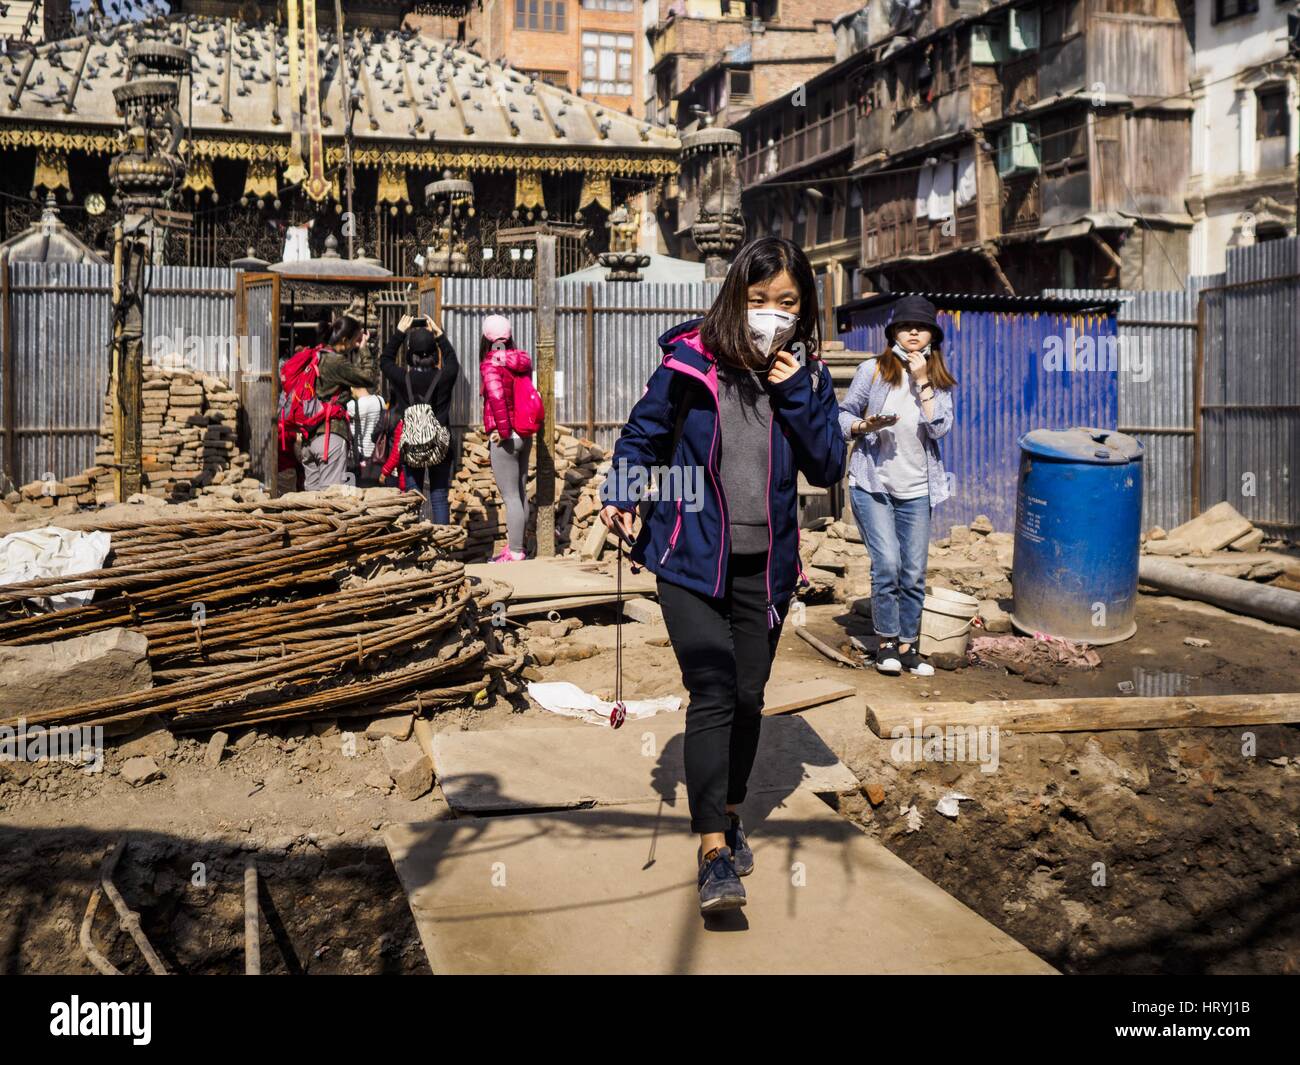 Kathmandu, Central Development Region, Nepal. 5th Mar, 2017. Tourists walk through an empty lot being rebuilt after the 2015 earthquake. Much of Kathmandu is now a construction site because of rebuilding two years after the earthquake of 25 April 2015 that devastated Nepal. In some villages in the Kathmandu valley workers are working by hand to remove ruble and dig out destroyed buildings. About 9,000 people were killed and another 22,000 injured by the earthquake. The epicenter of the earthquake was east of the Gorka district. Credit: Jack Kurtz/ZUMA Wire/Alamy Live News Stock Photo